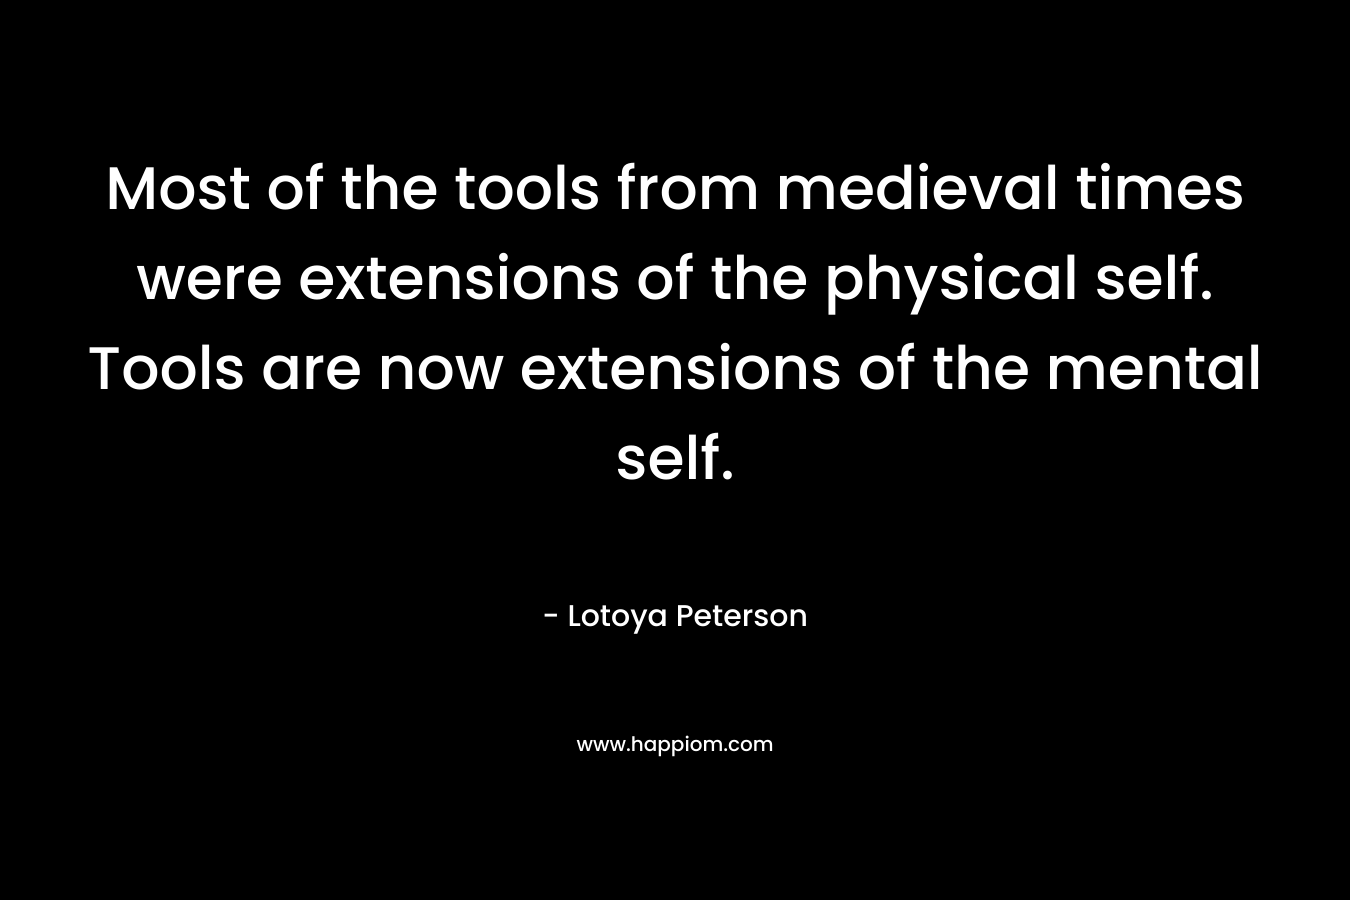 Most of the tools from medieval times were extensions of the physical self. Tools are now extensions of the mental self.